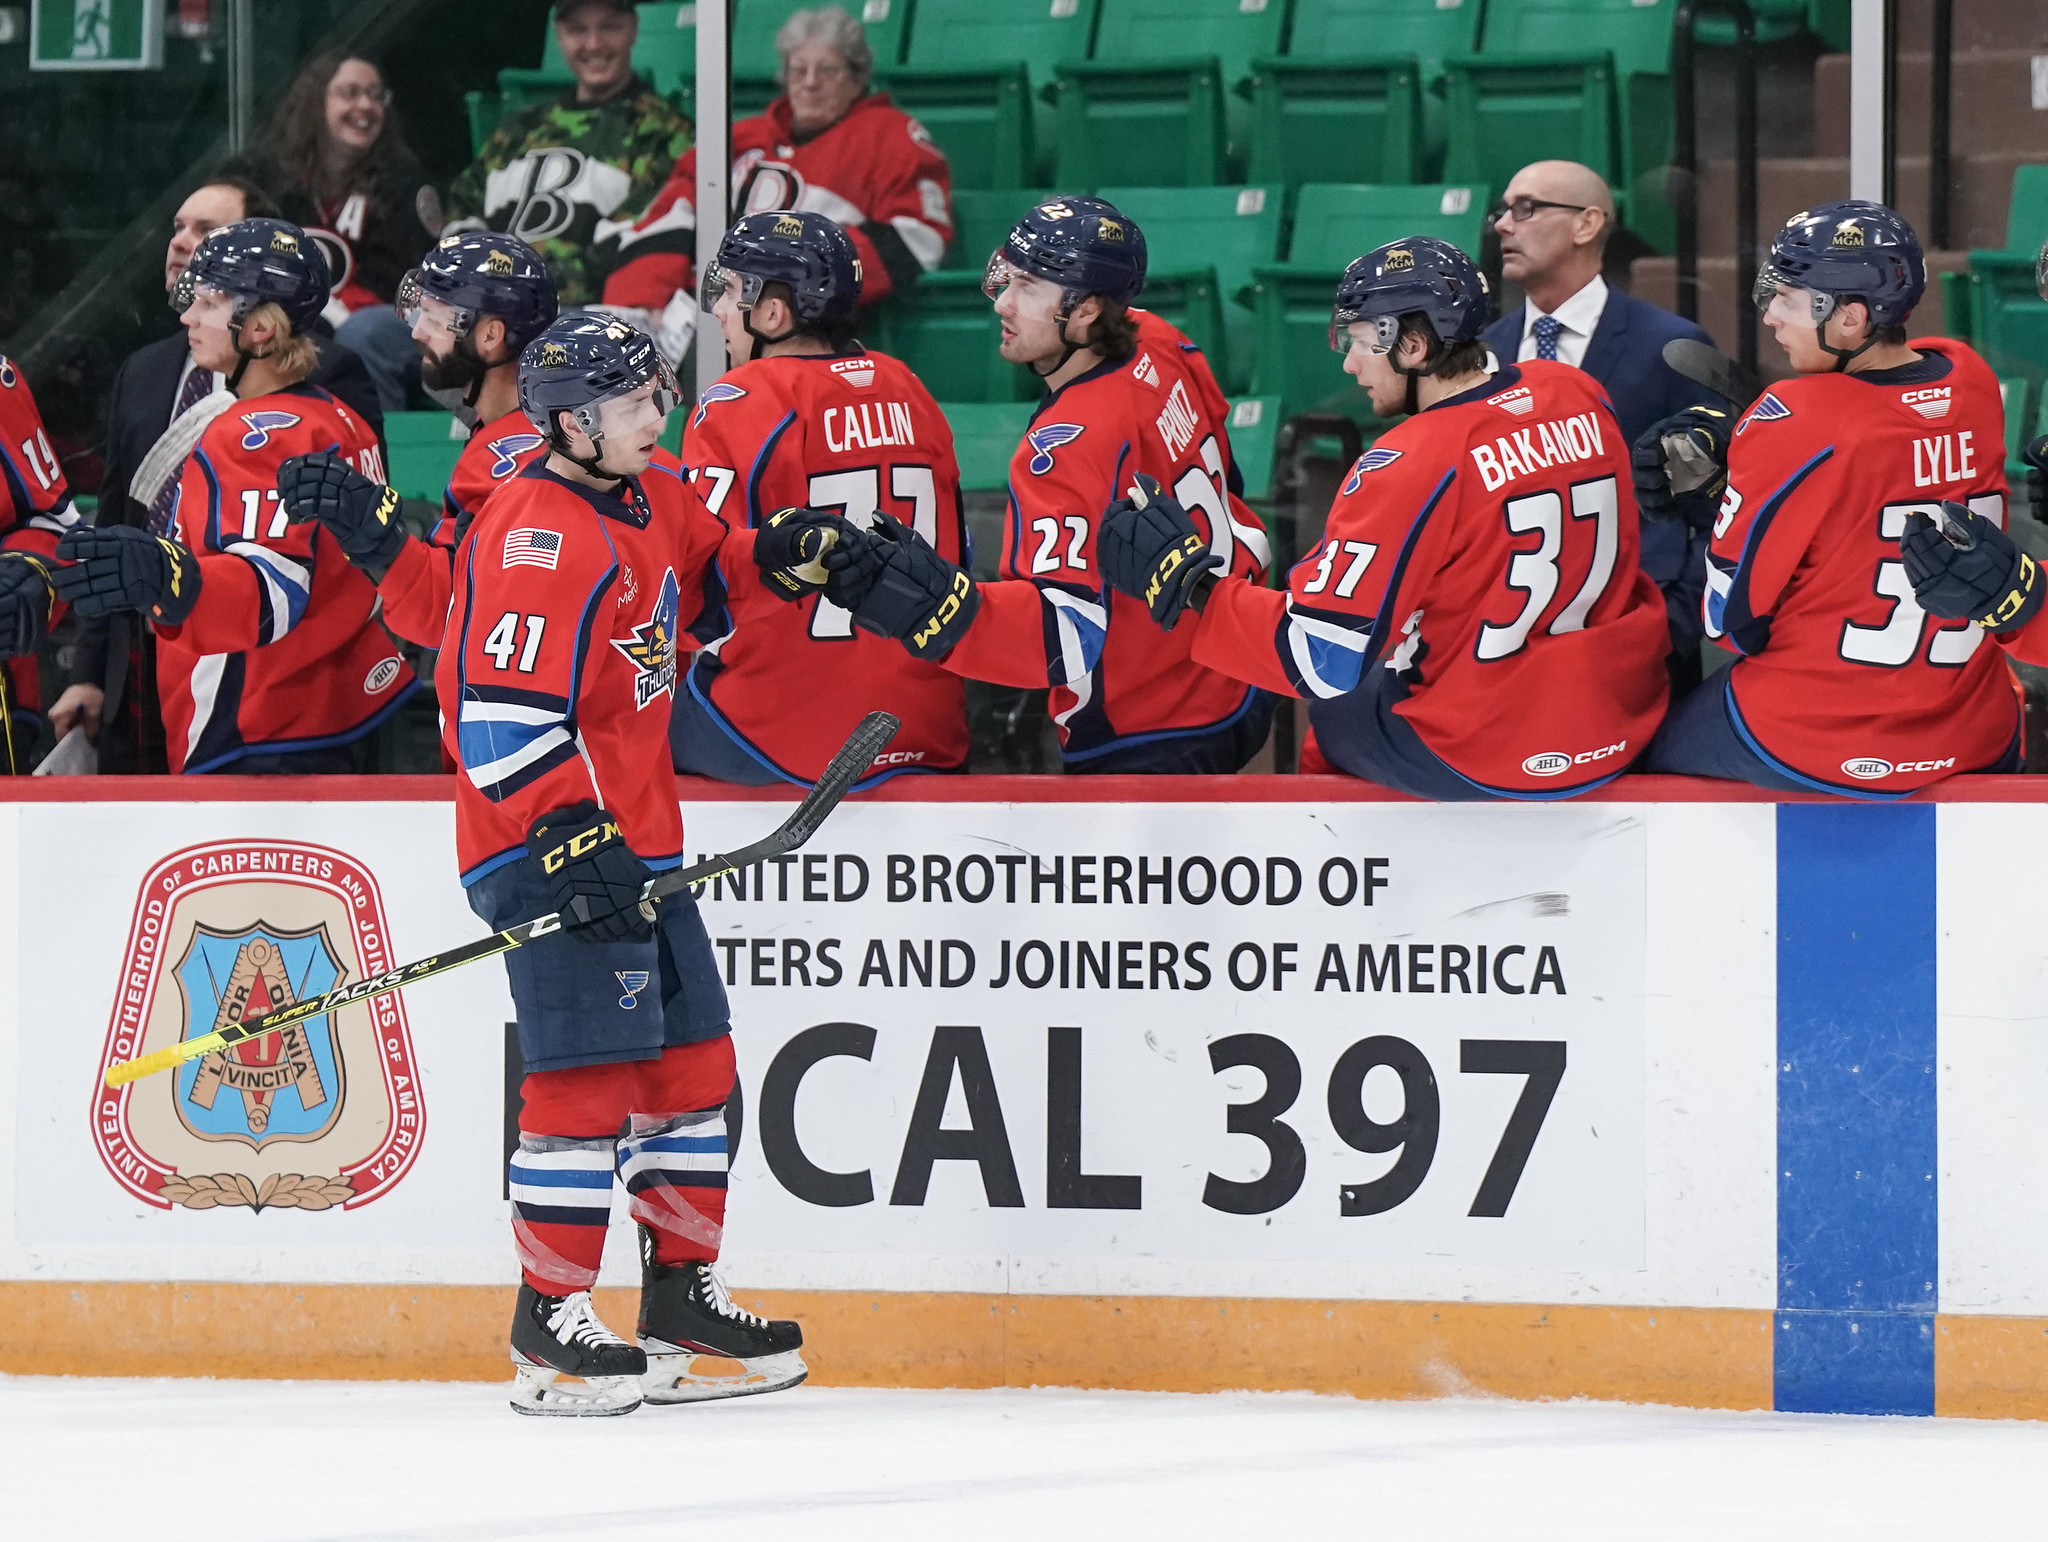 IceHogs fall to Wolves at home; Reichel gets the fans rowdy